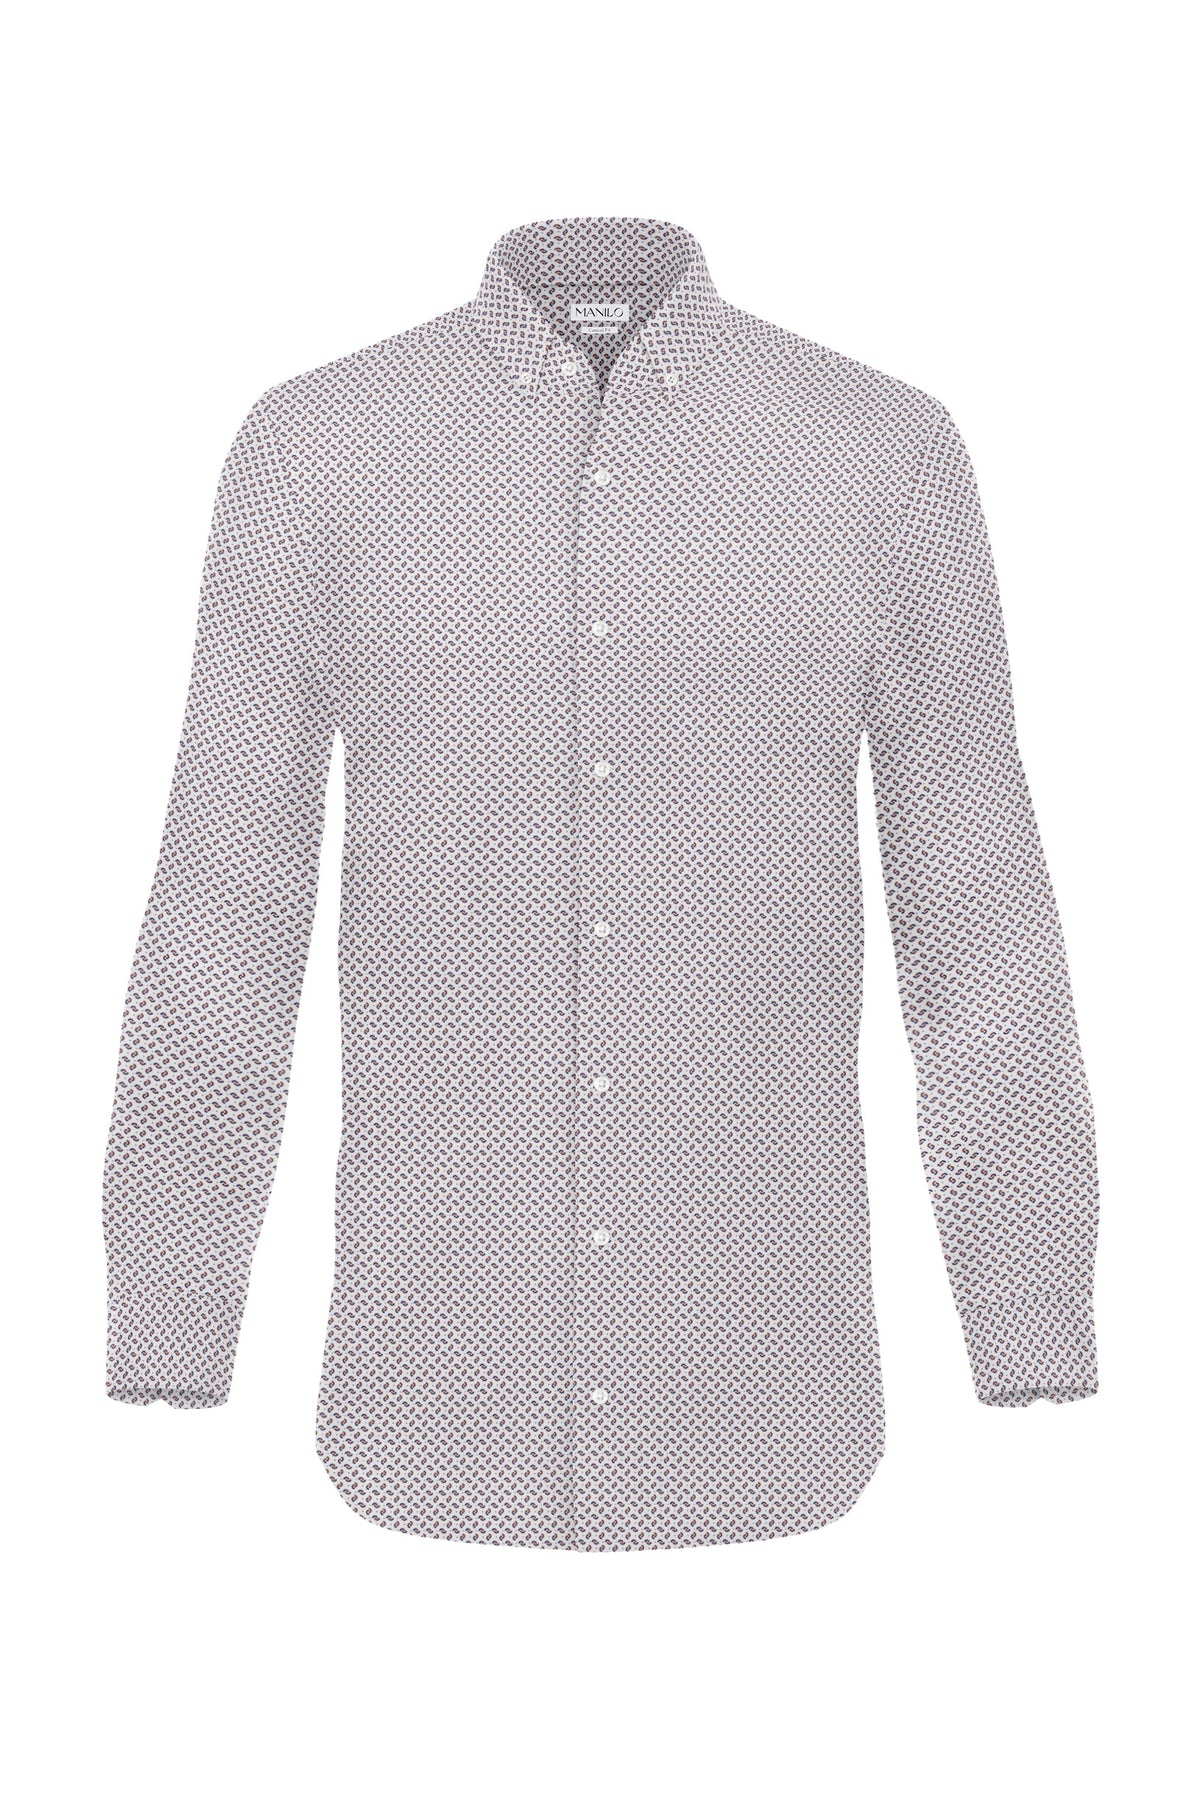 Printed casual shirt with graphic pattern in white/brown (Art. 2114-C)